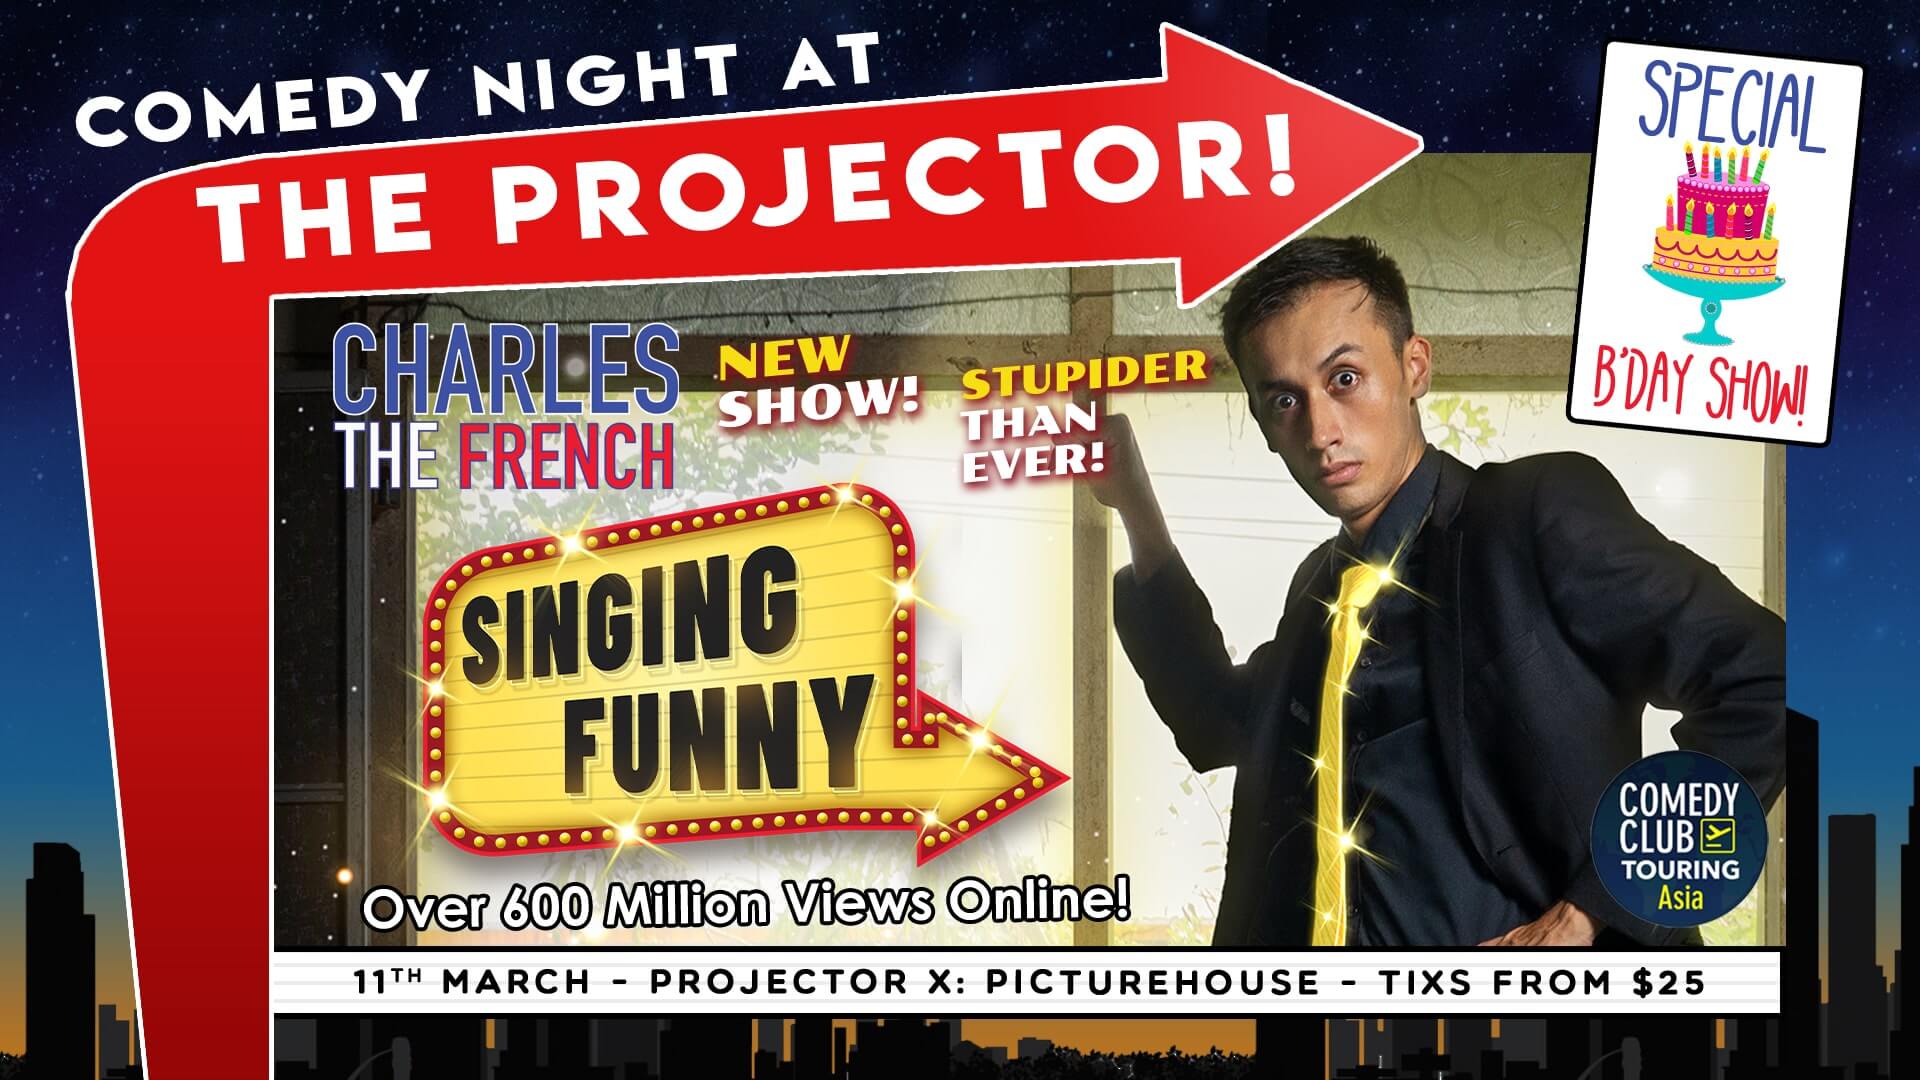 Comedy Night at The Projector: Charles The French – ‘Singing Funny’